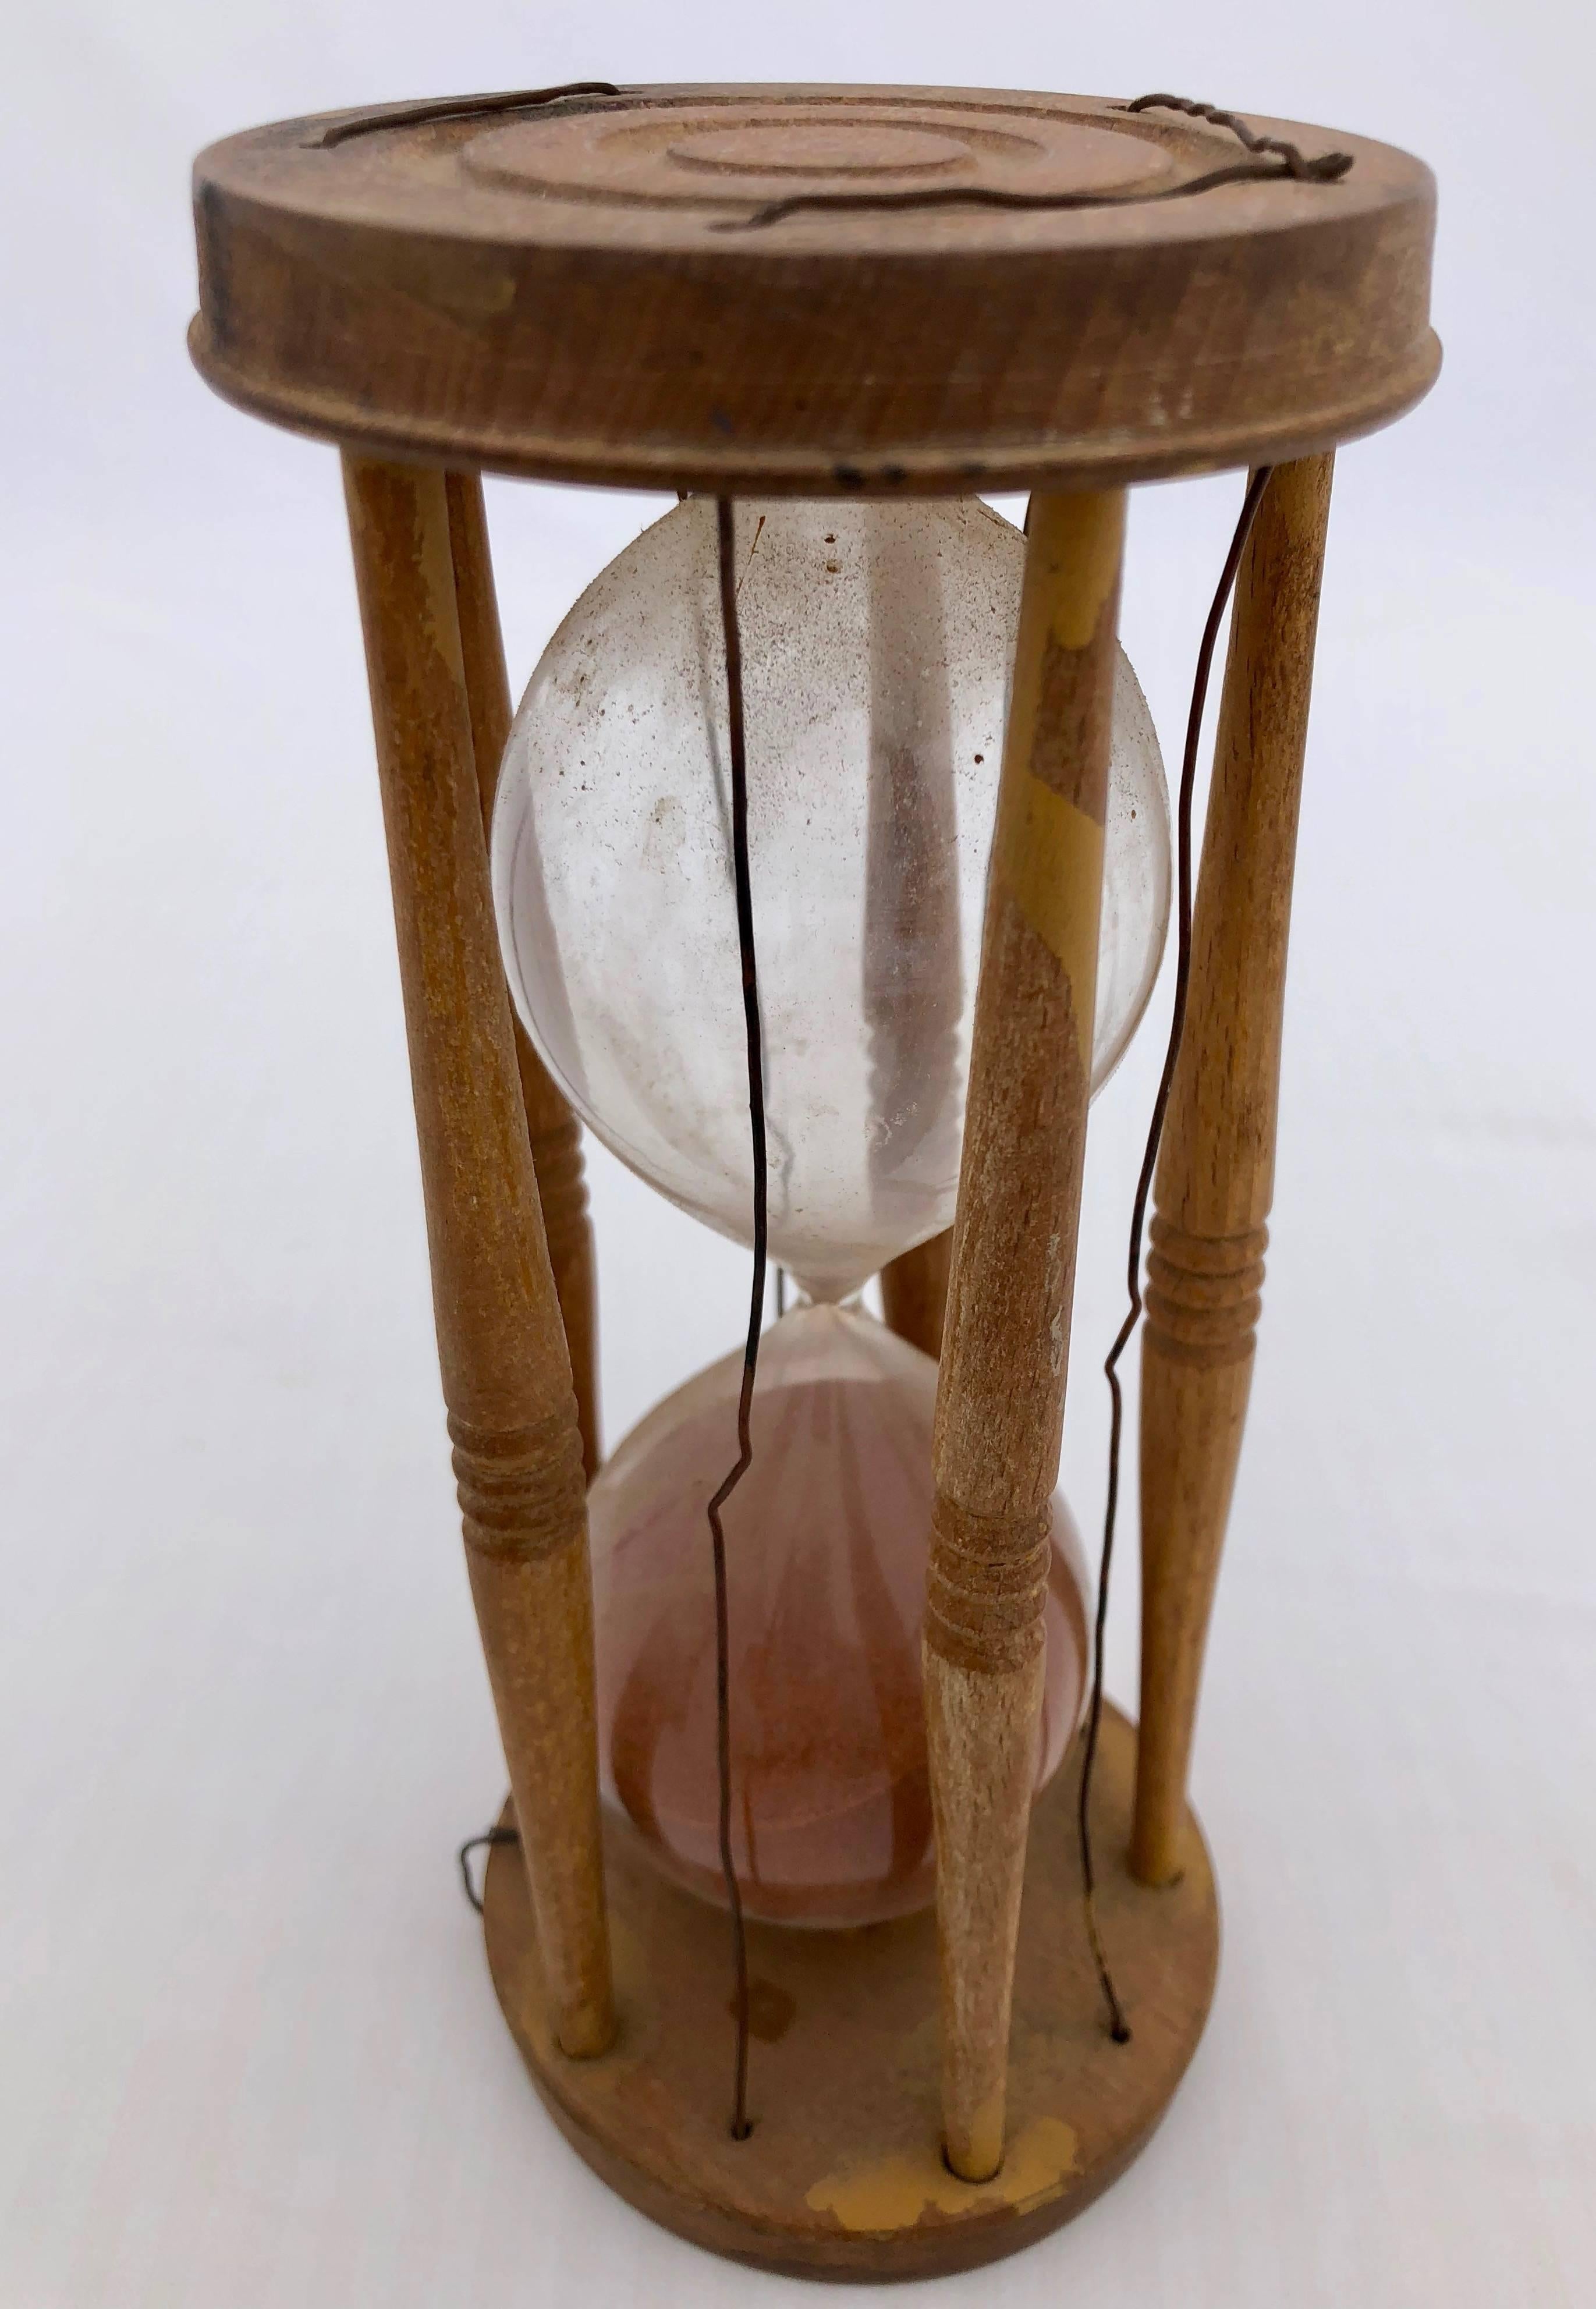 These beautiful sand timers are from the Empire period and have round wood frames, tapering turned wood spindles and handblown glass filled with red sand. Each of the wood frames are hand carved, one is reinforced with old wire.
Such sand timers